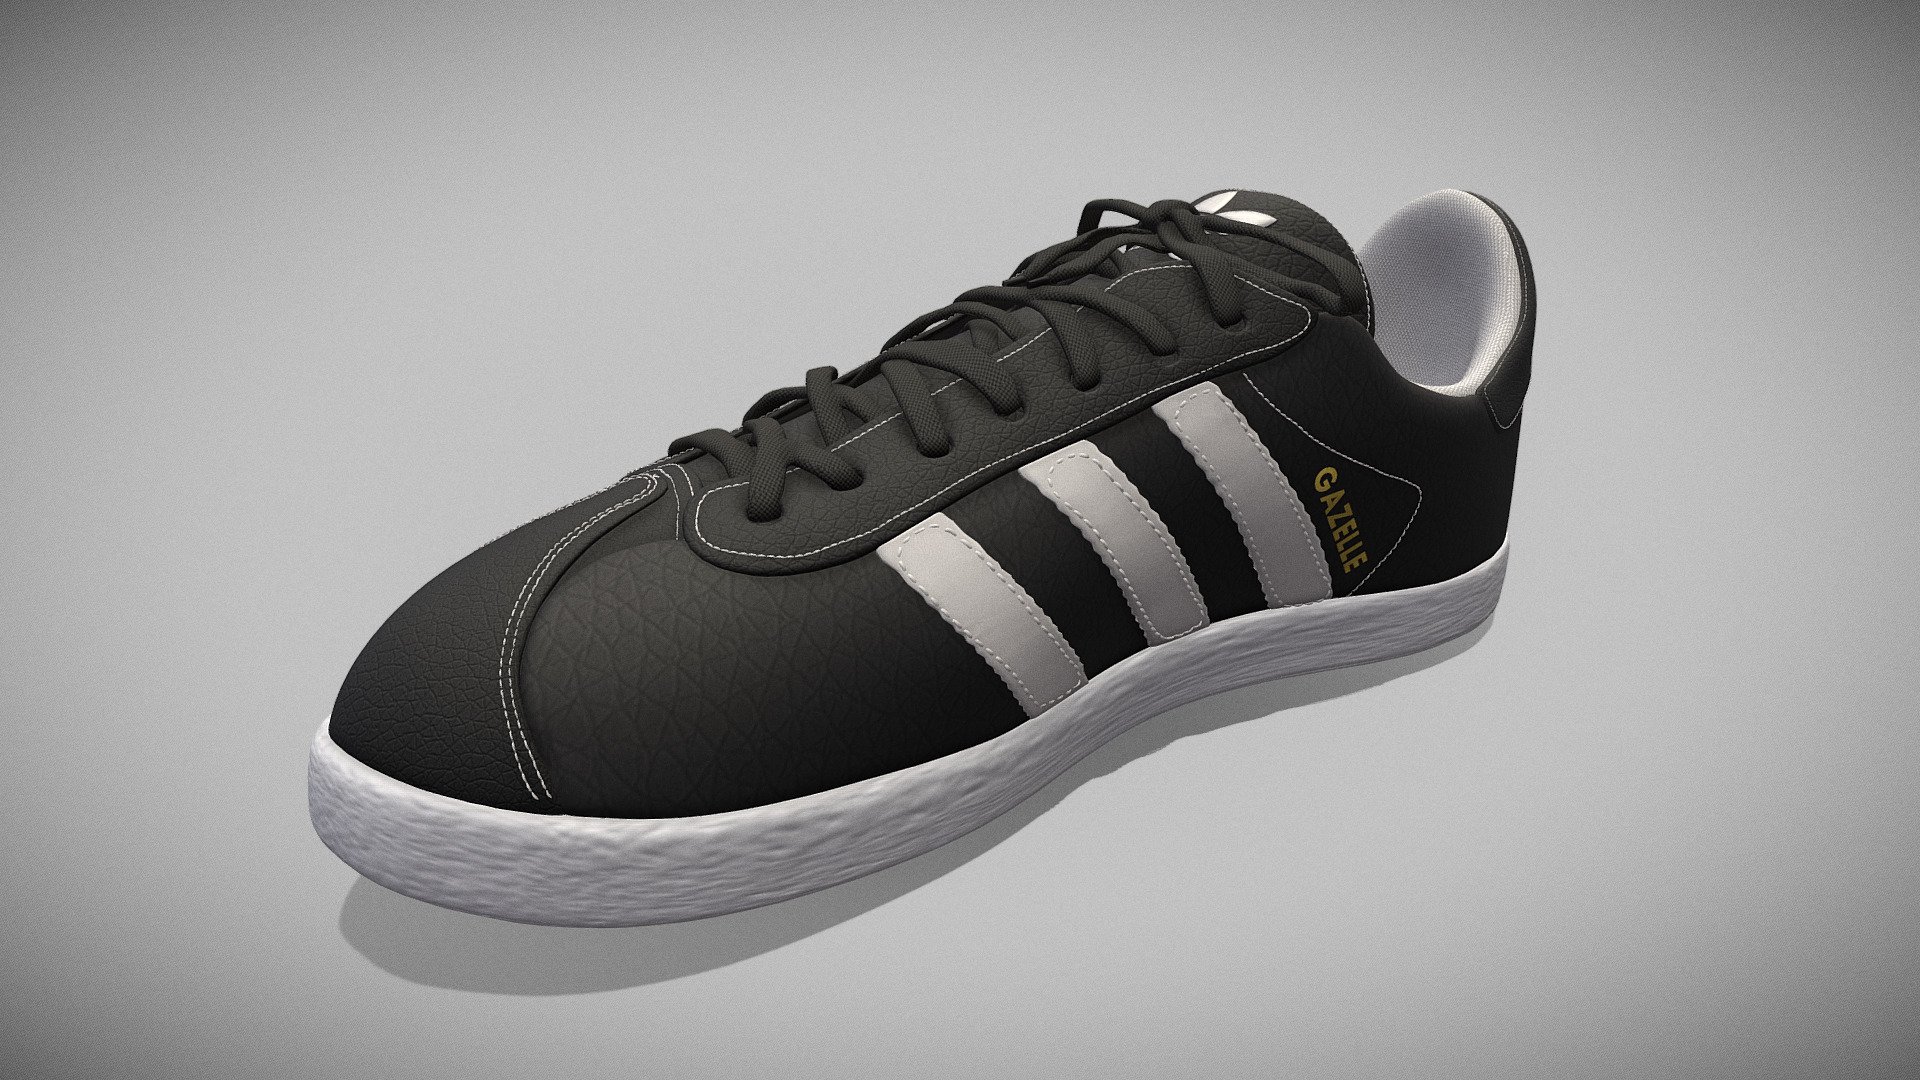 Free inspiration from the fantastic historic Adidas Gazelle model.
If you don't like it don't shoot me, I'm not a shoe designer, it's just fun! - Adidas Gazelle - my personal interpretation - 3D model by bobmen 3d model